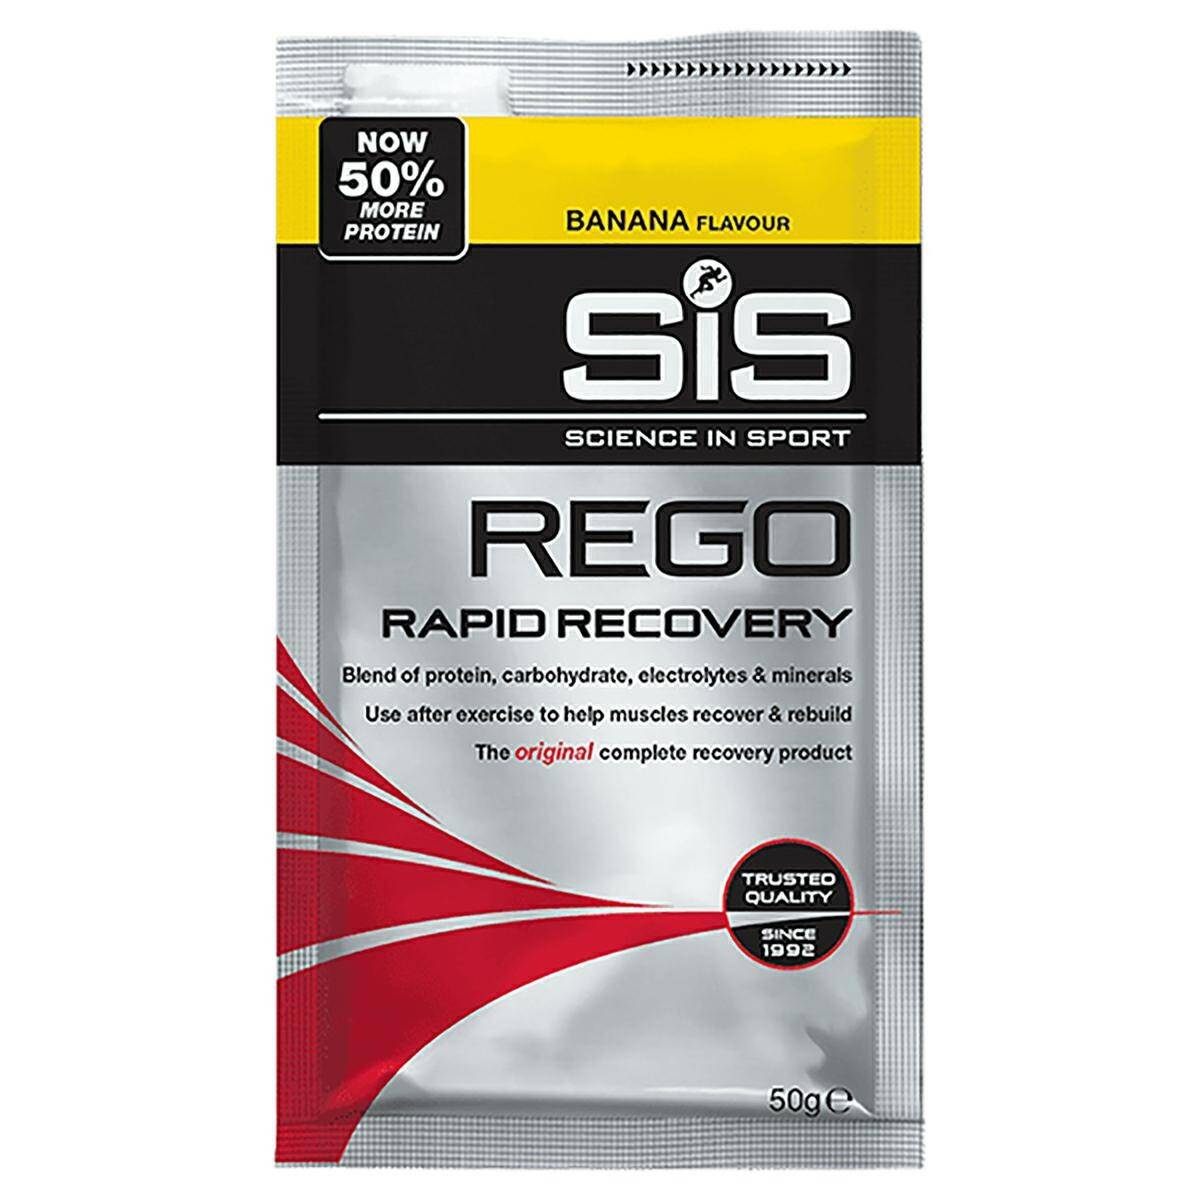 SIS Rego Rapid Recovery banan 50g.